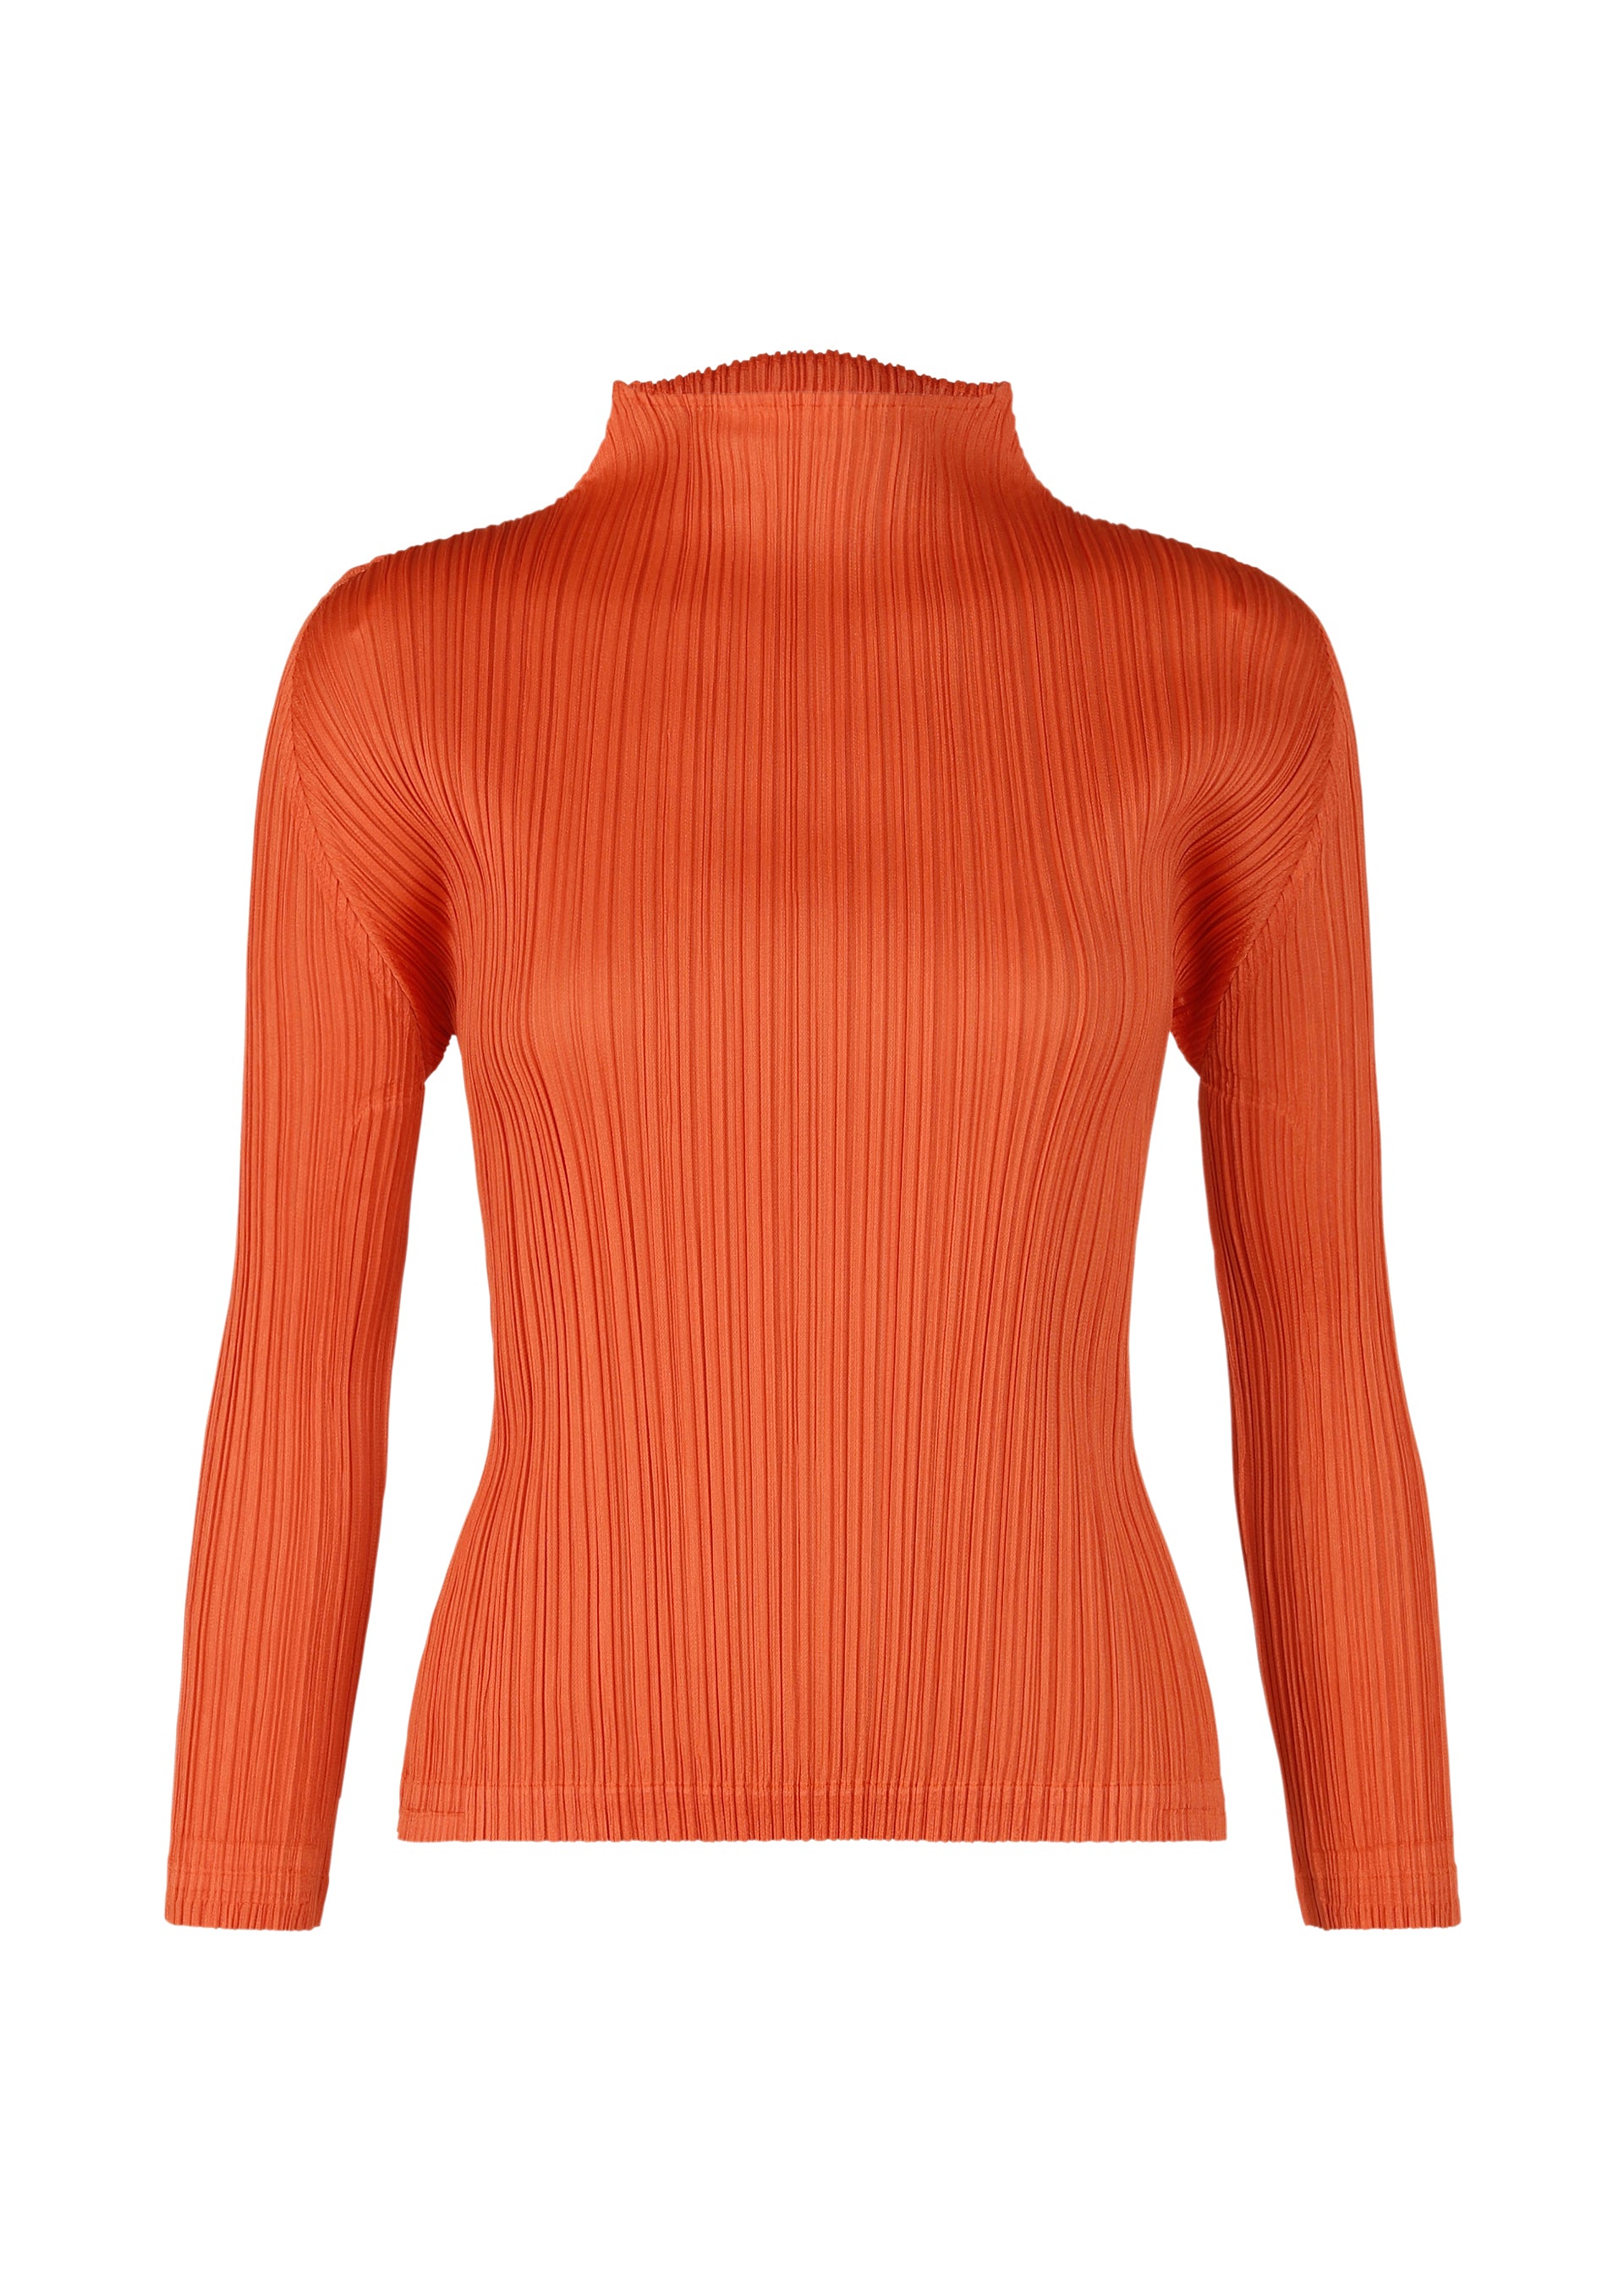 PLEATS PLEASE ISSEY MIYAKE Tops | Page 5 | ISSEY MIYAKE ONLINE